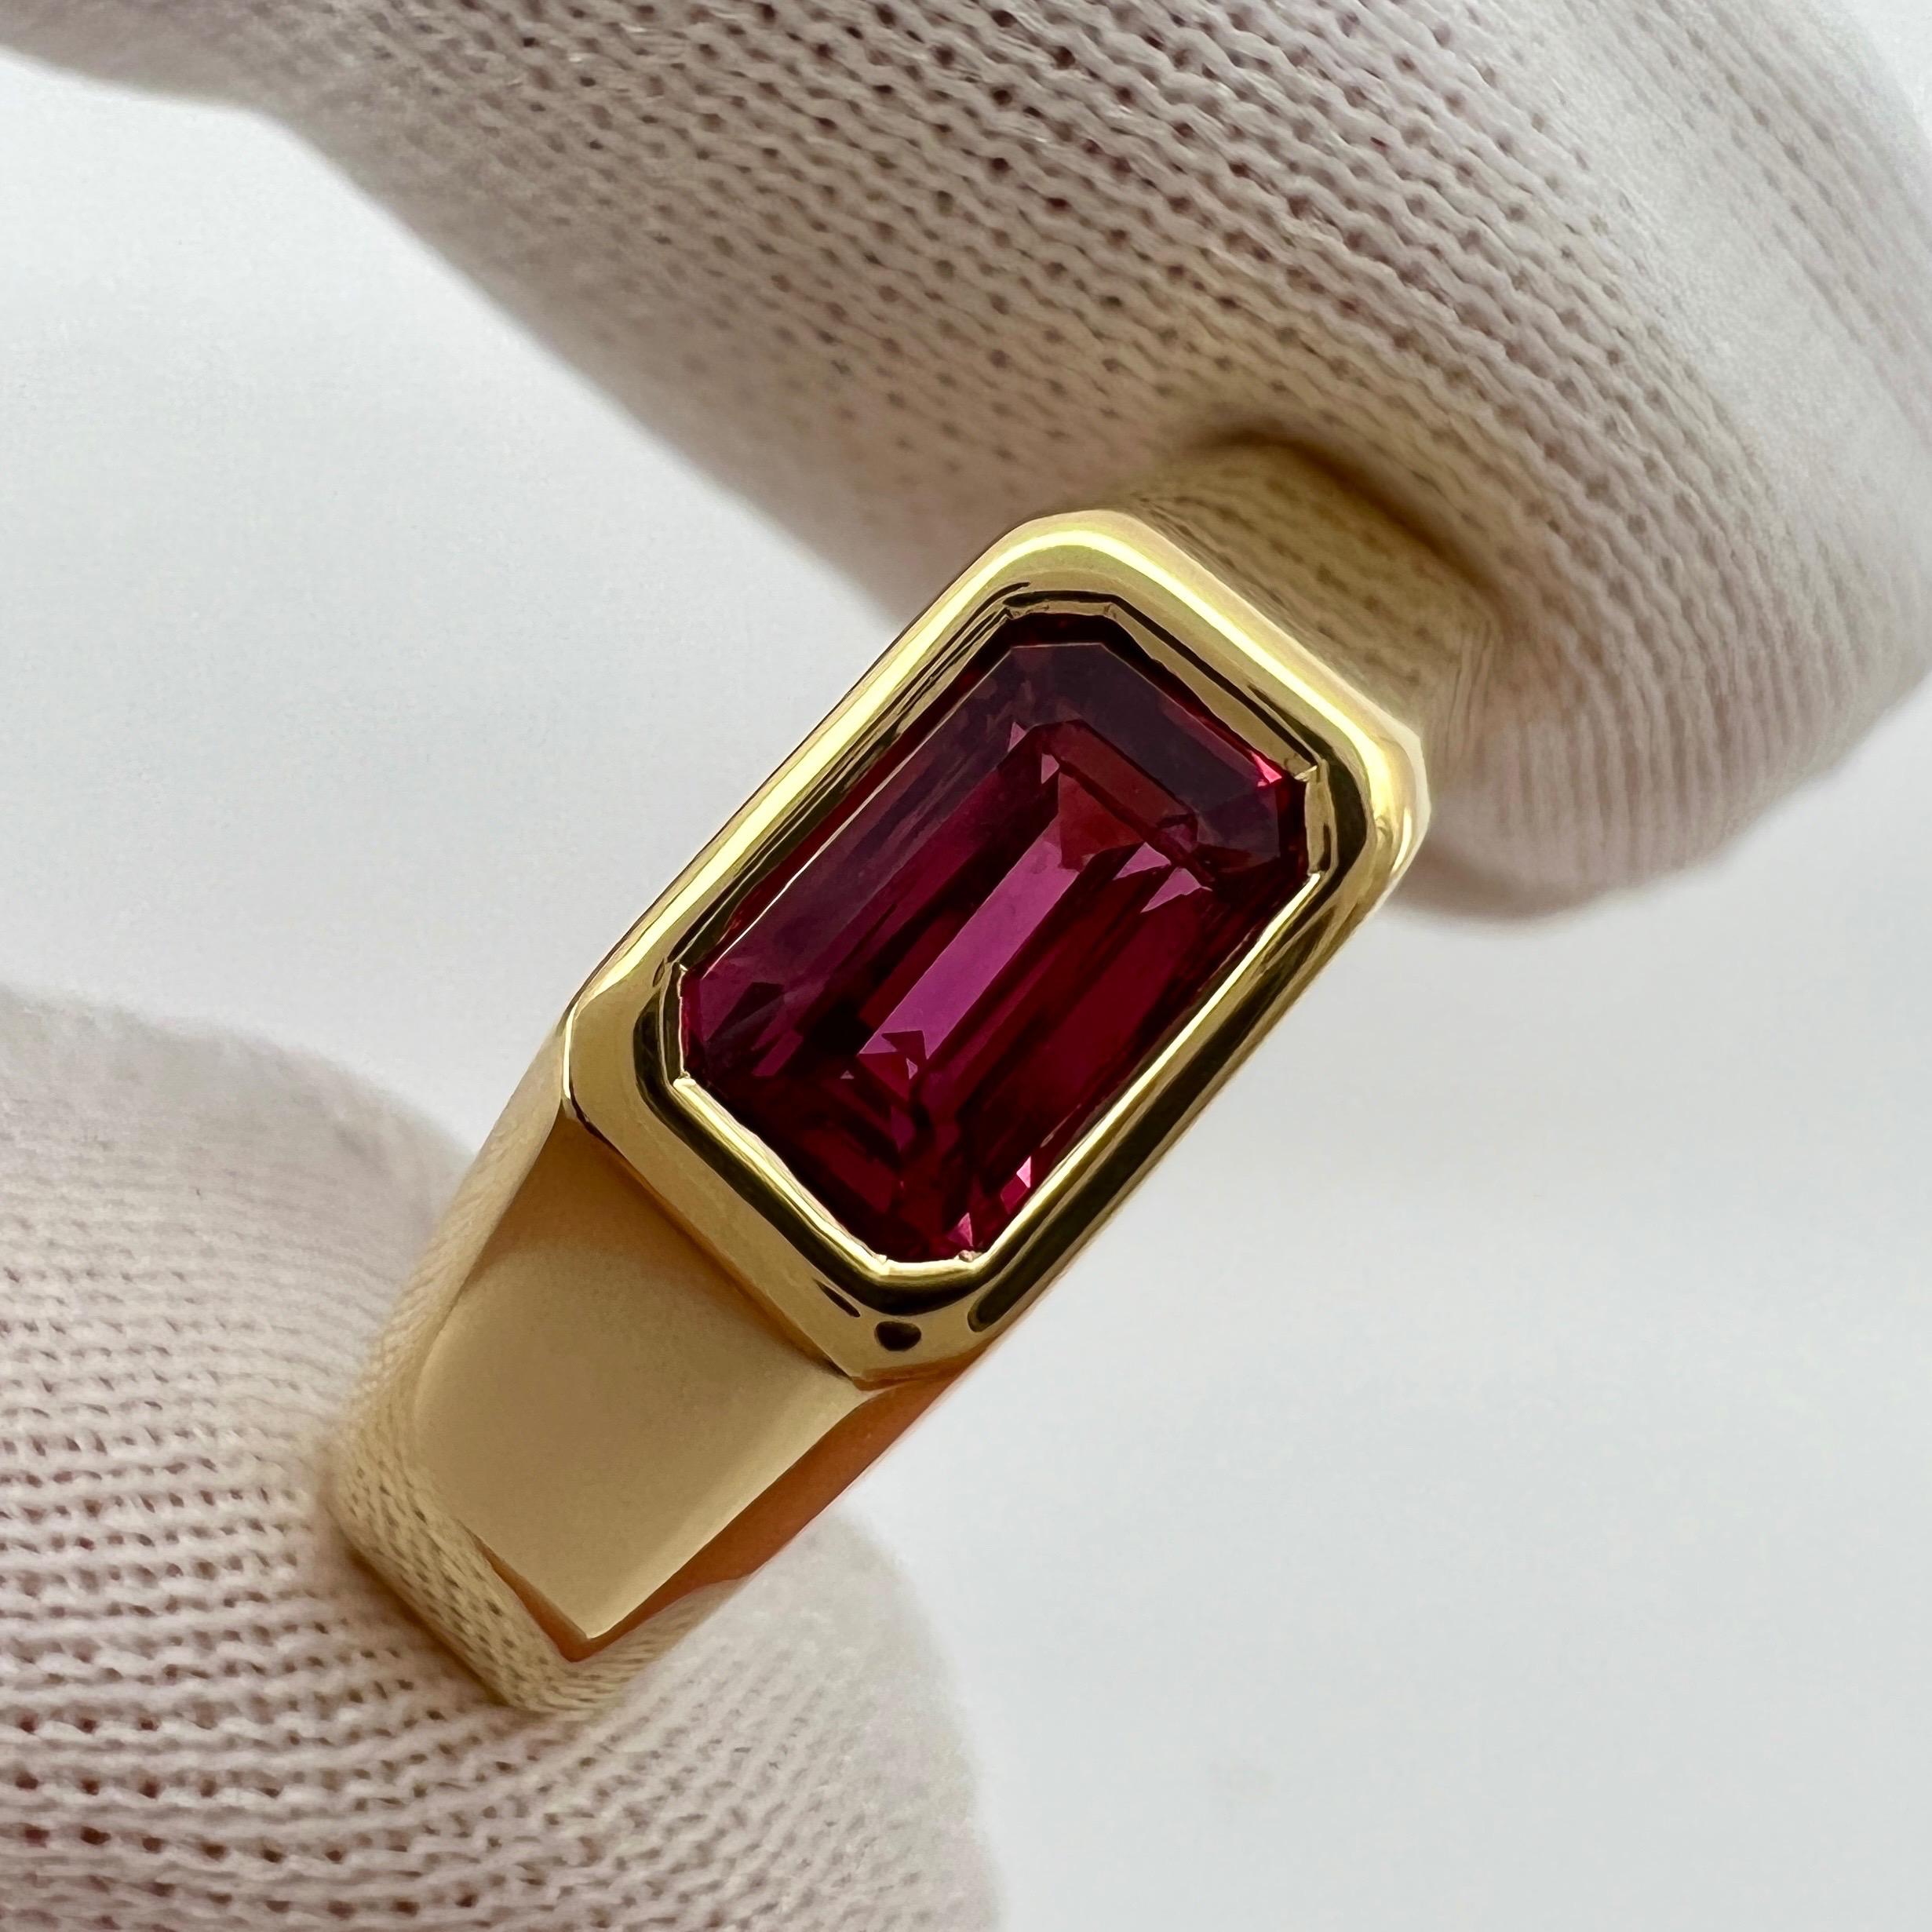 Natural Untreated Deep Red Ruby GRA Certified 18k Yellow Gold Solitaire Signet Style Ring.

Beautiful 0.64 carat ruby with a deep red colour and excellent emerald octagonal cut. Also has very good clarity. A very clean stone with only some very